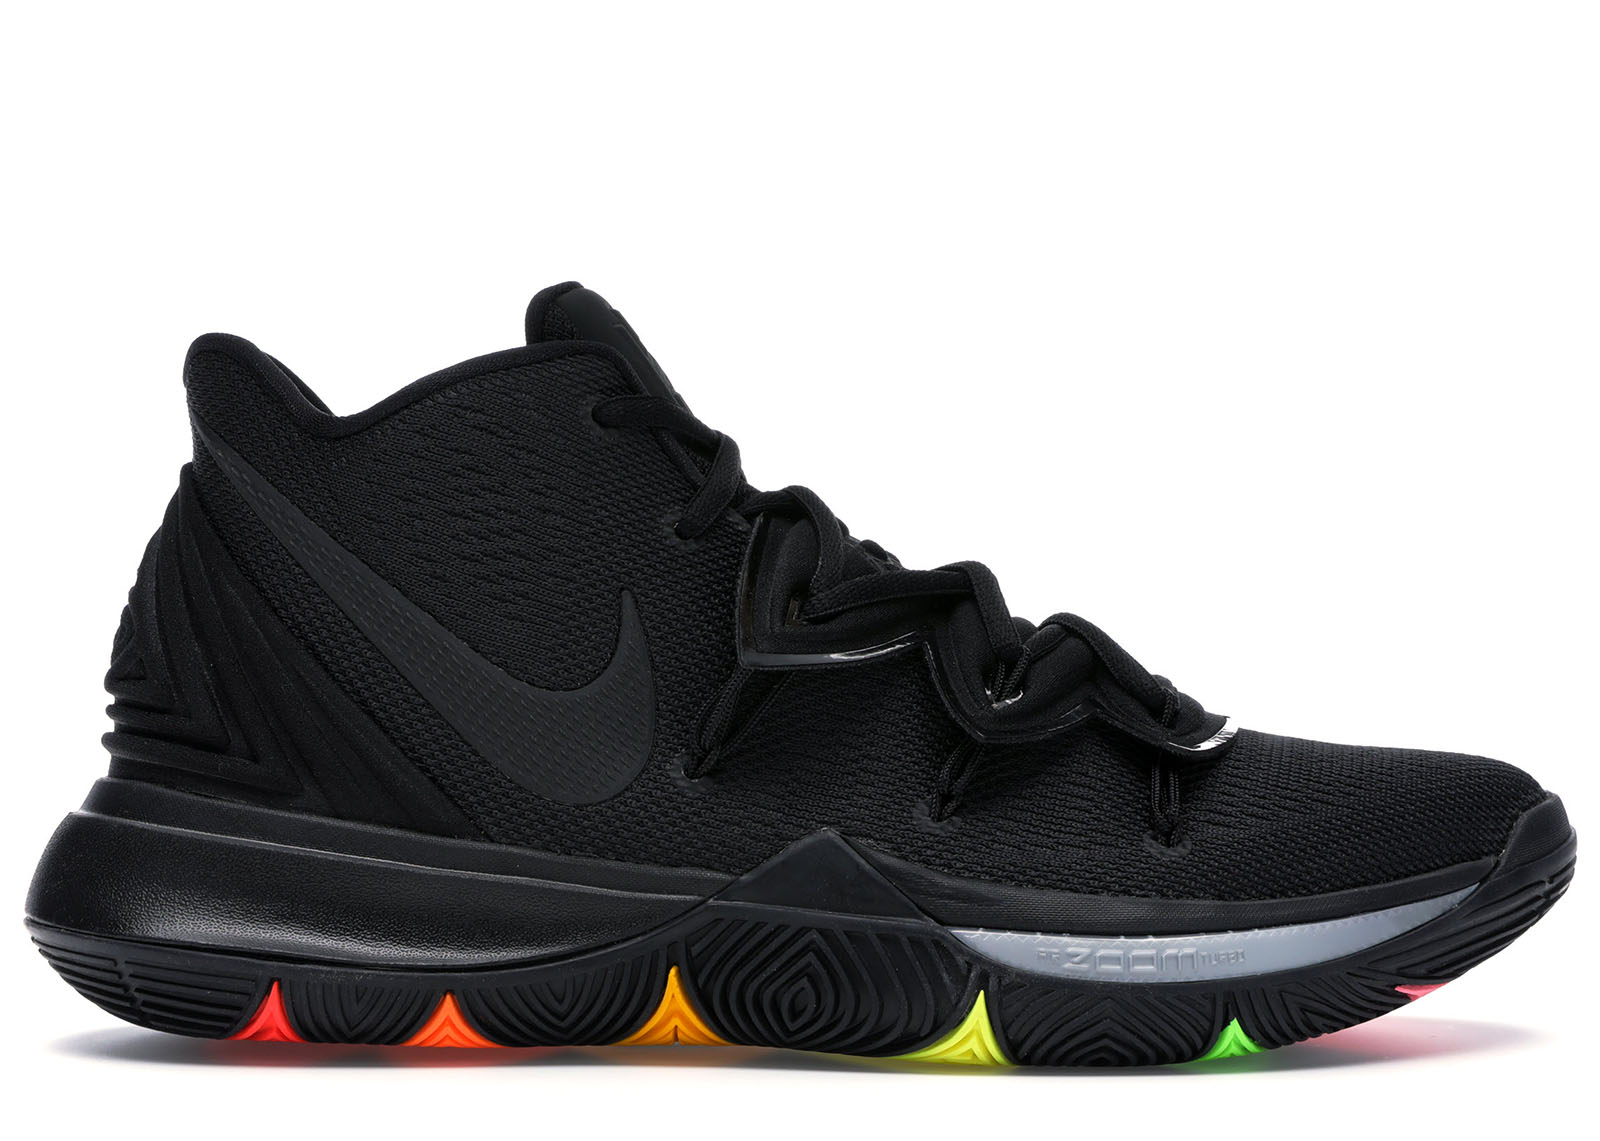 kyrie 5 insole